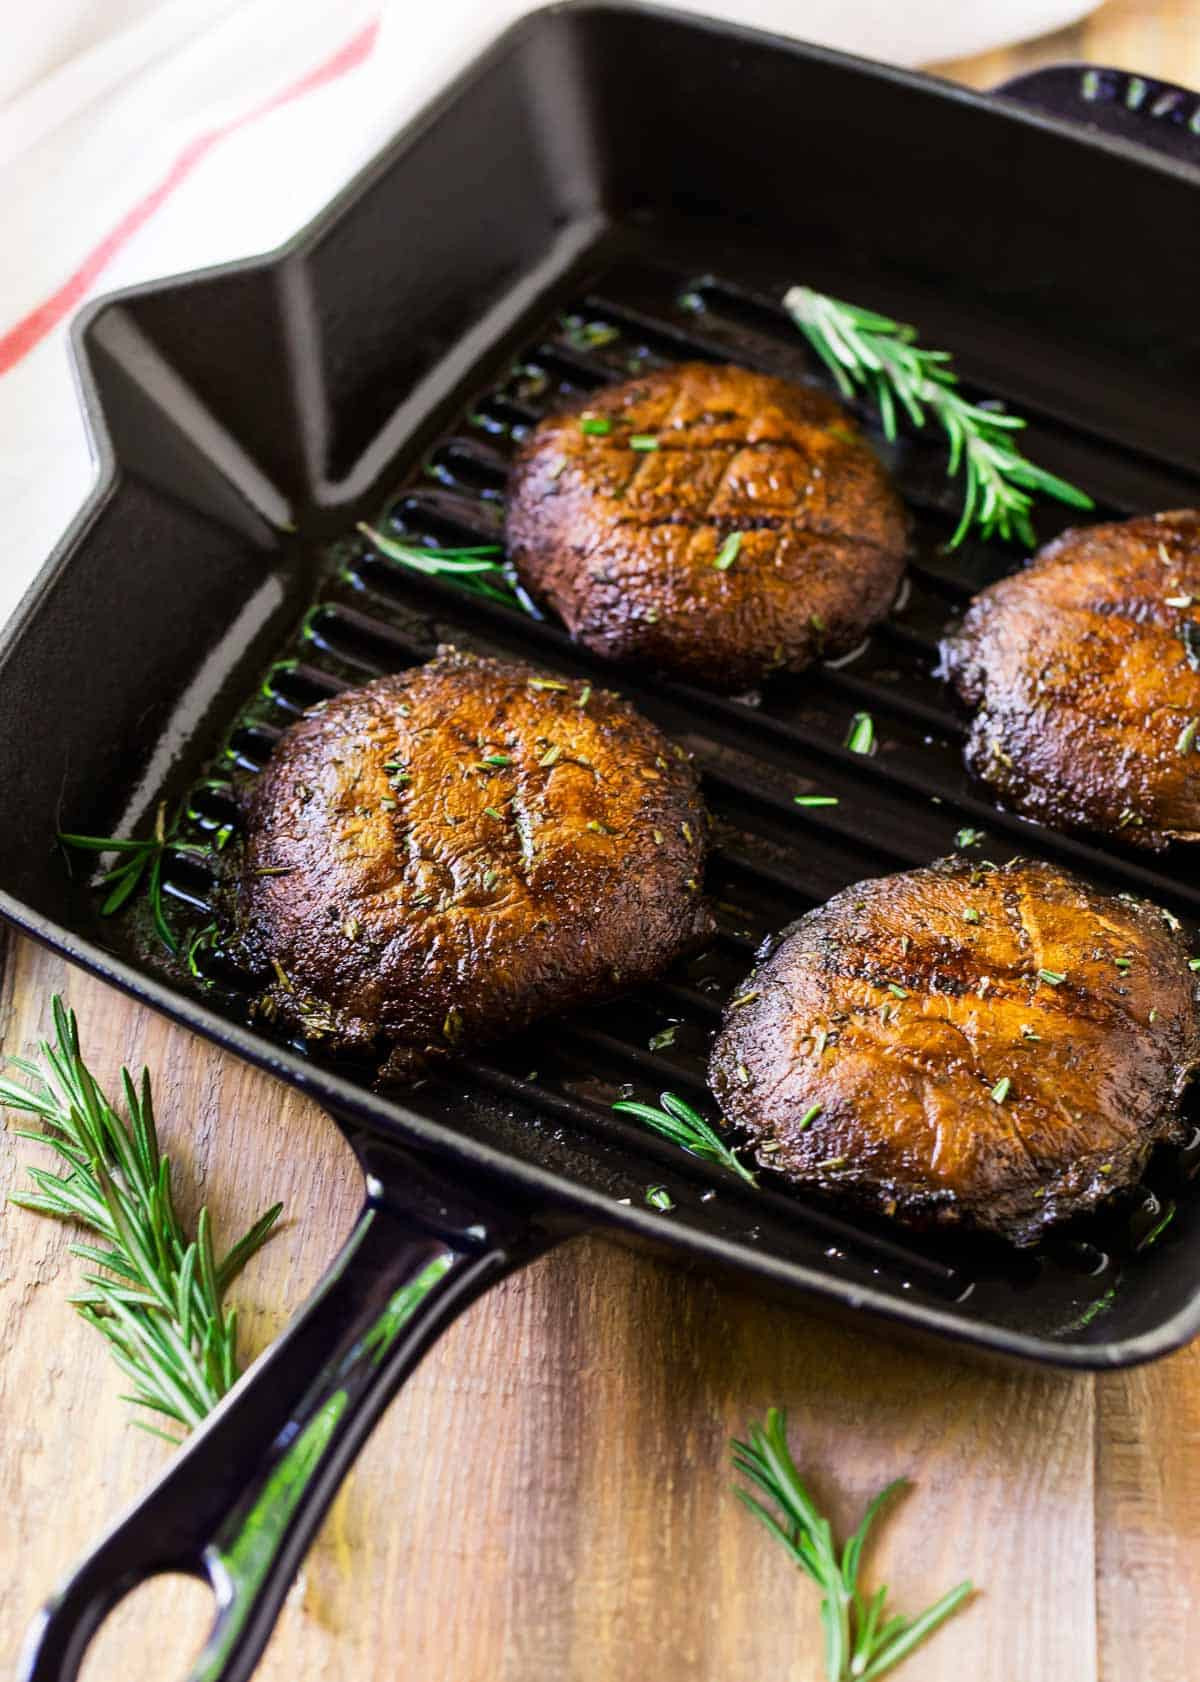 Don’t Miss Our 15 Most Shared Broiled Portobello Mushrooms